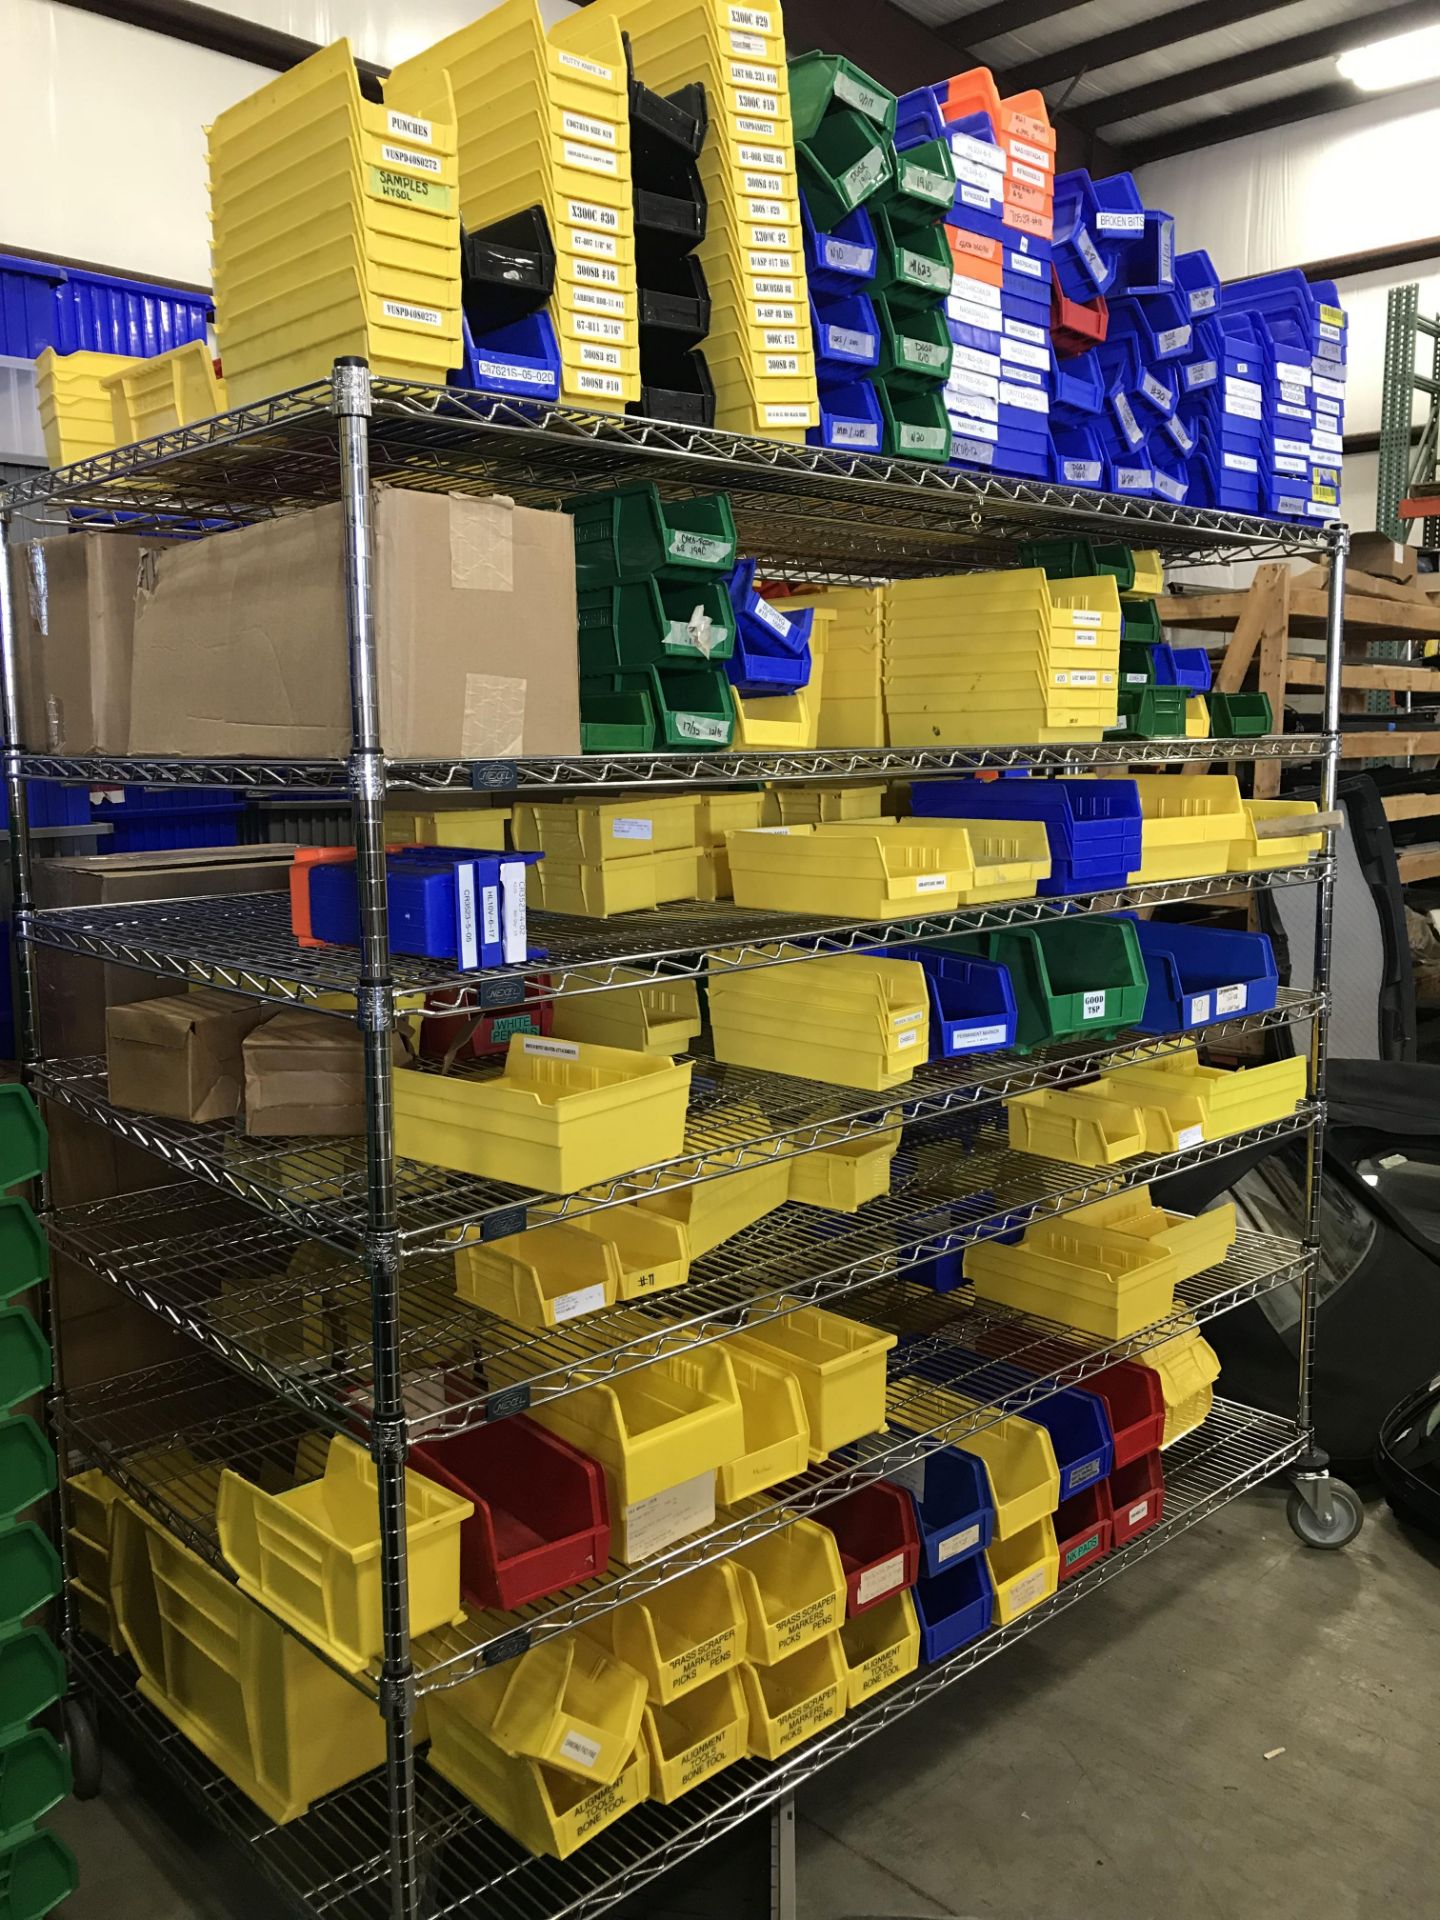 ROLLING CART FILLED WITH PLASTIC ORGANIZATION BINS - Image 3 of 3